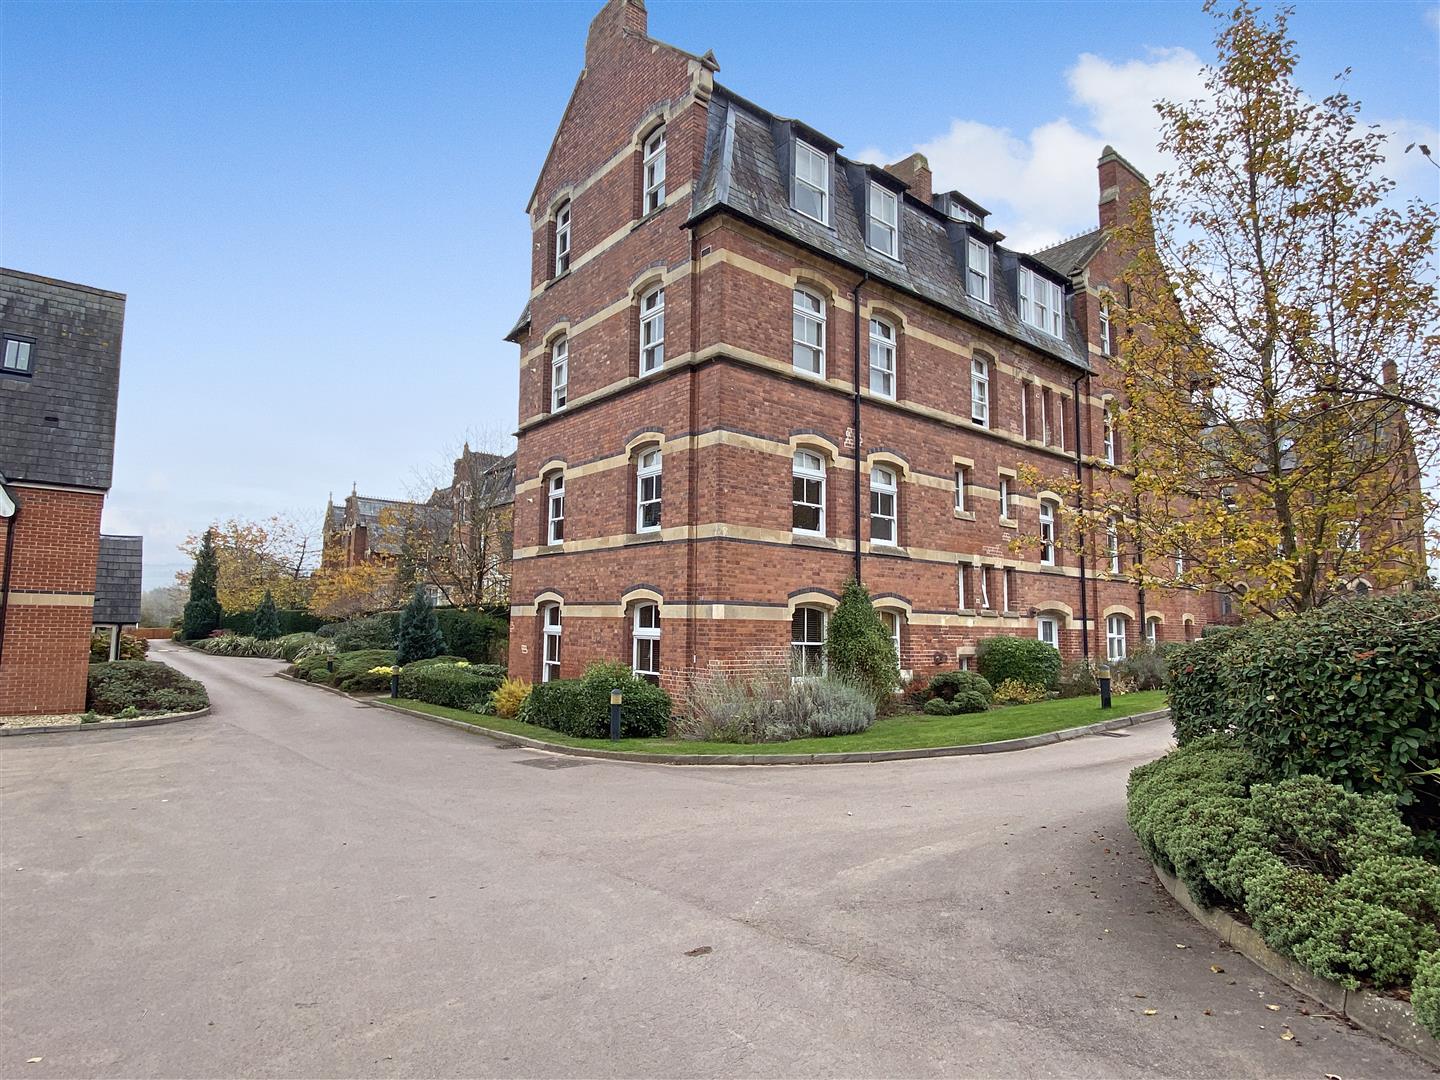 2 bed apartment for sale in Bartestree, HR1